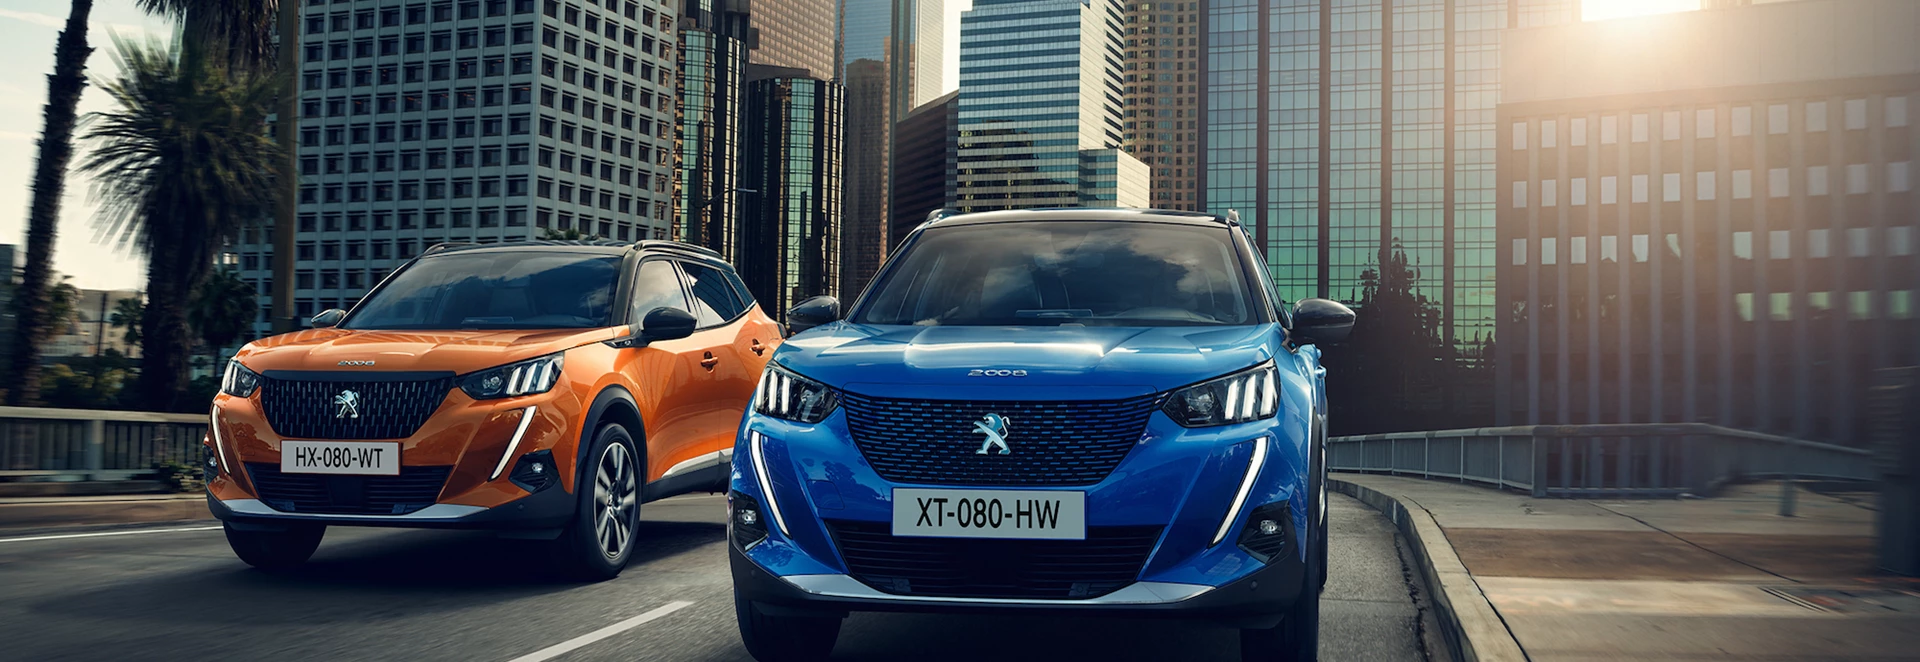 All-new Peugeot 2008 and e-2008 revealed 